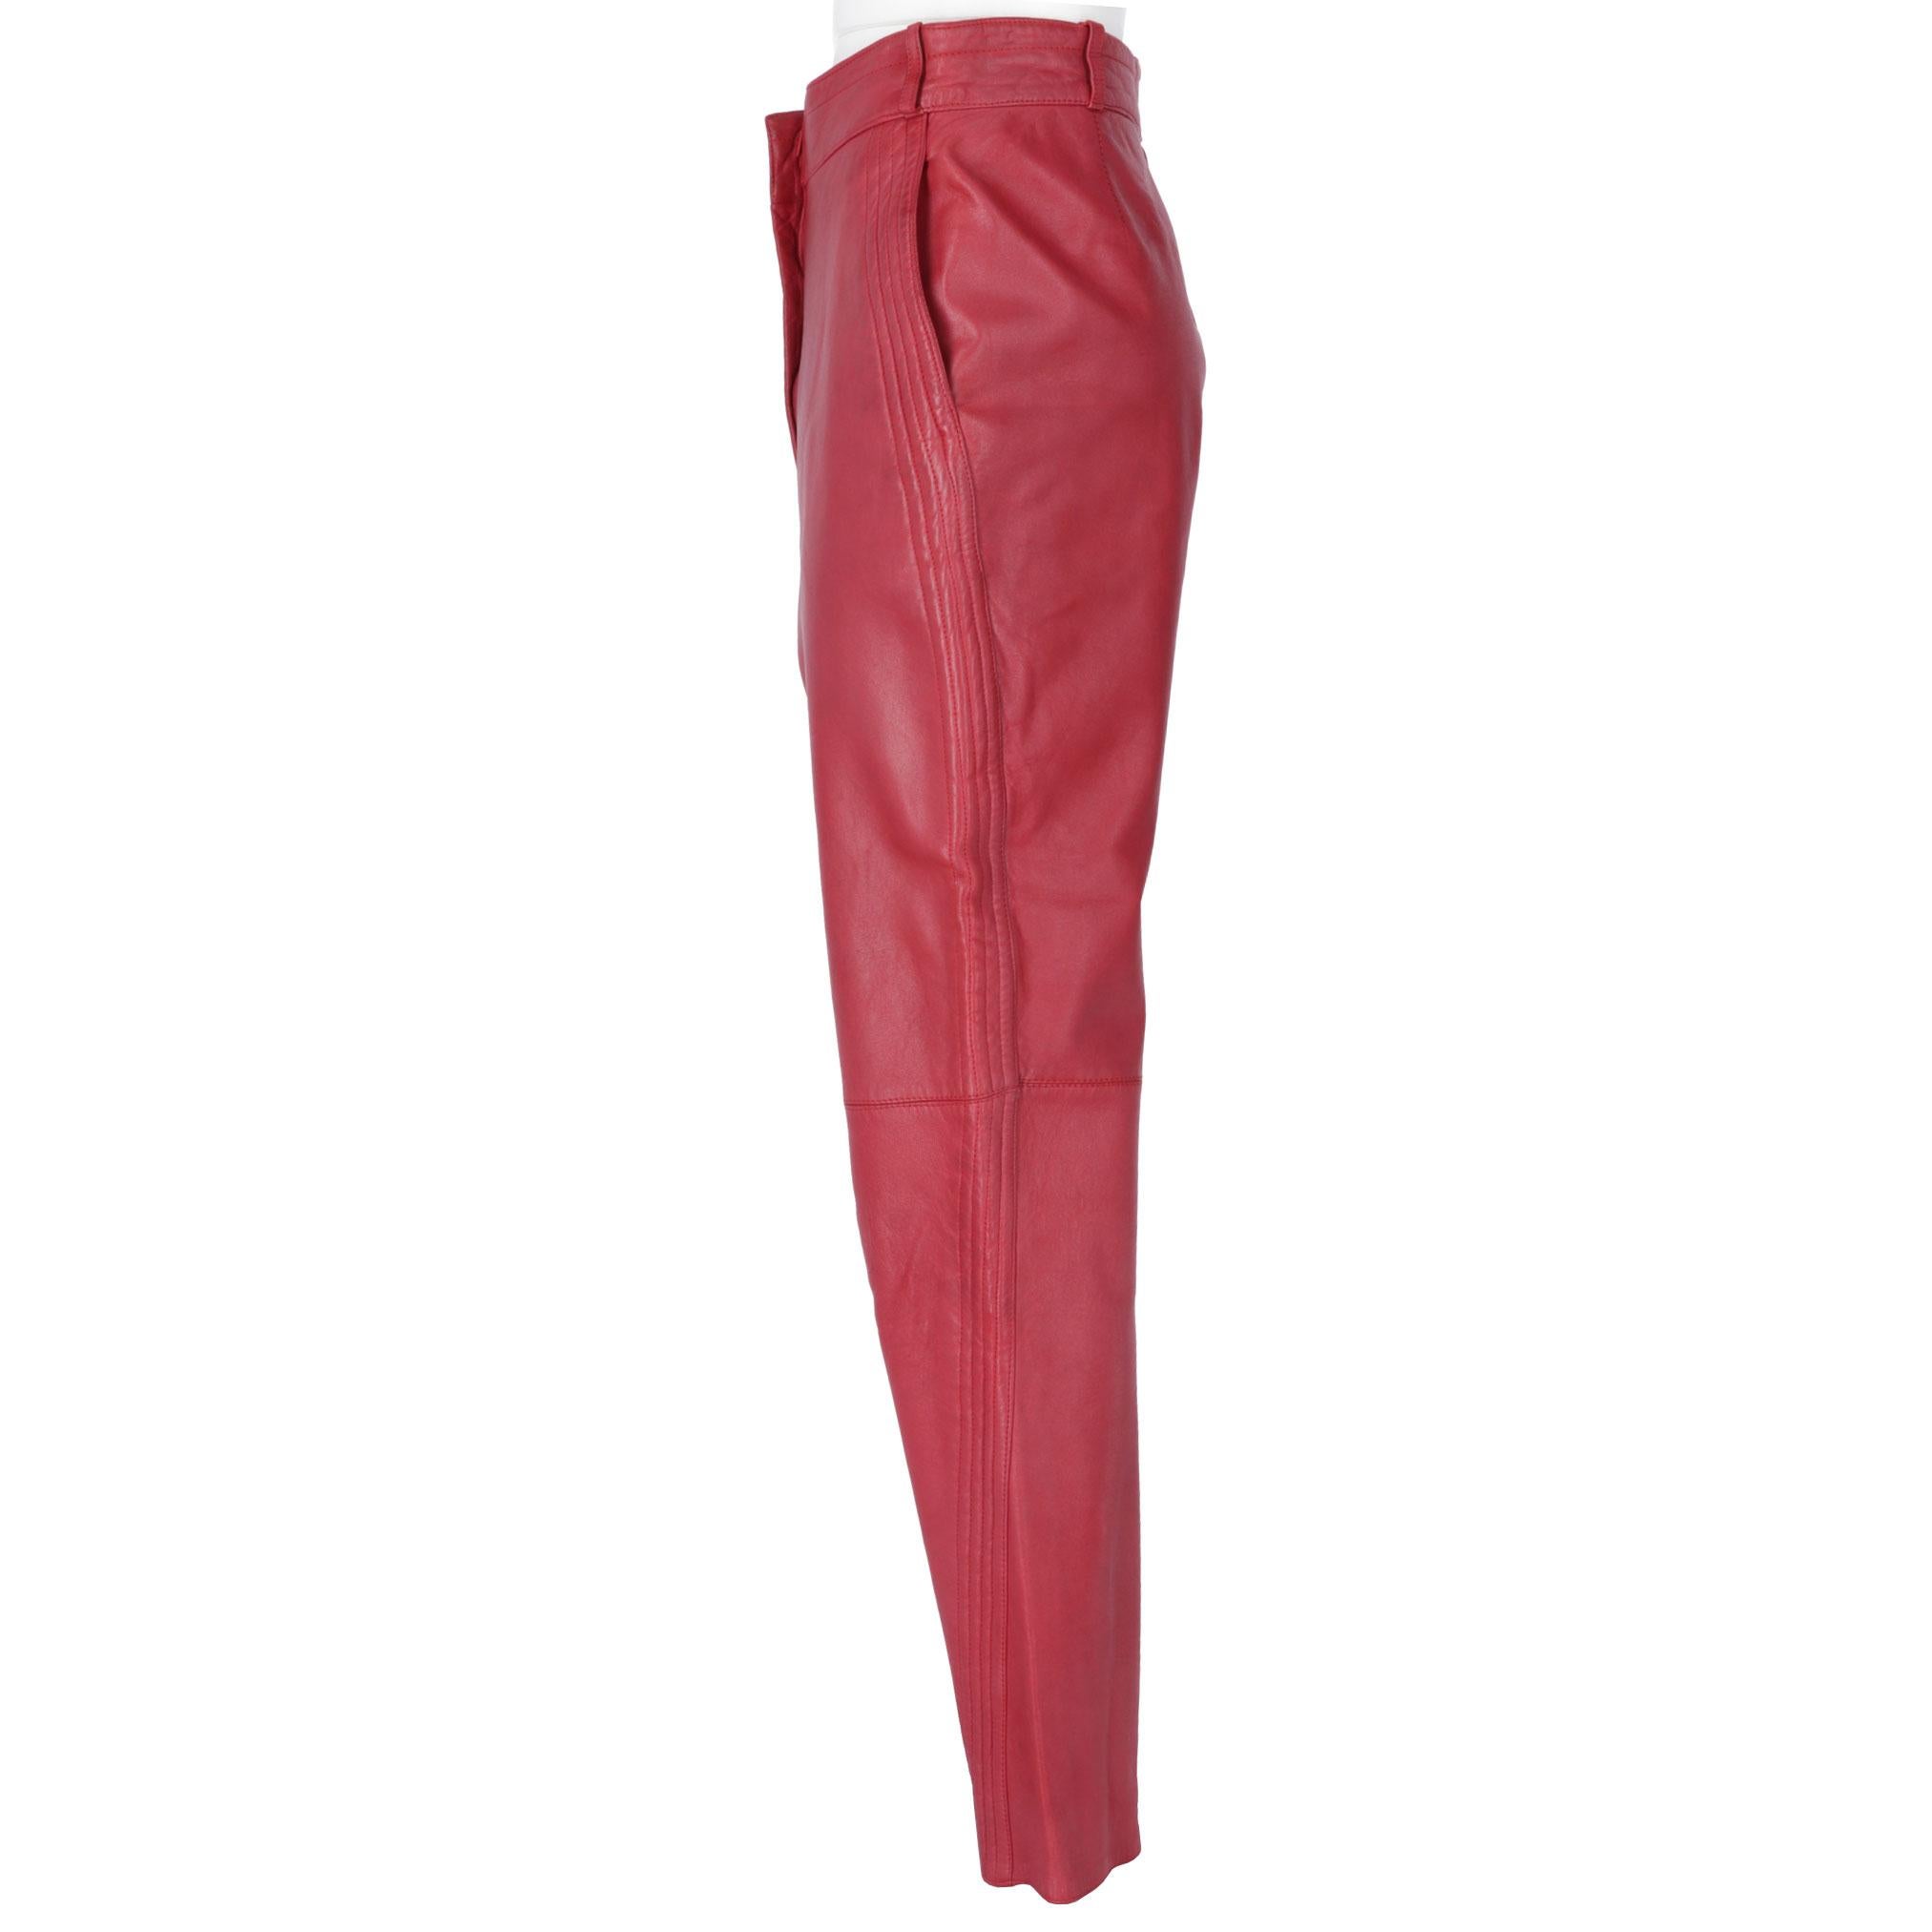 Red Gianni Versace genuine leather trousers, with carrot cut, high waist, front zip closure, belt loops, side welt pockets and decorative stitching on the length. The product is semi-lined.

The item shows slight marks on the skin and signs of wear